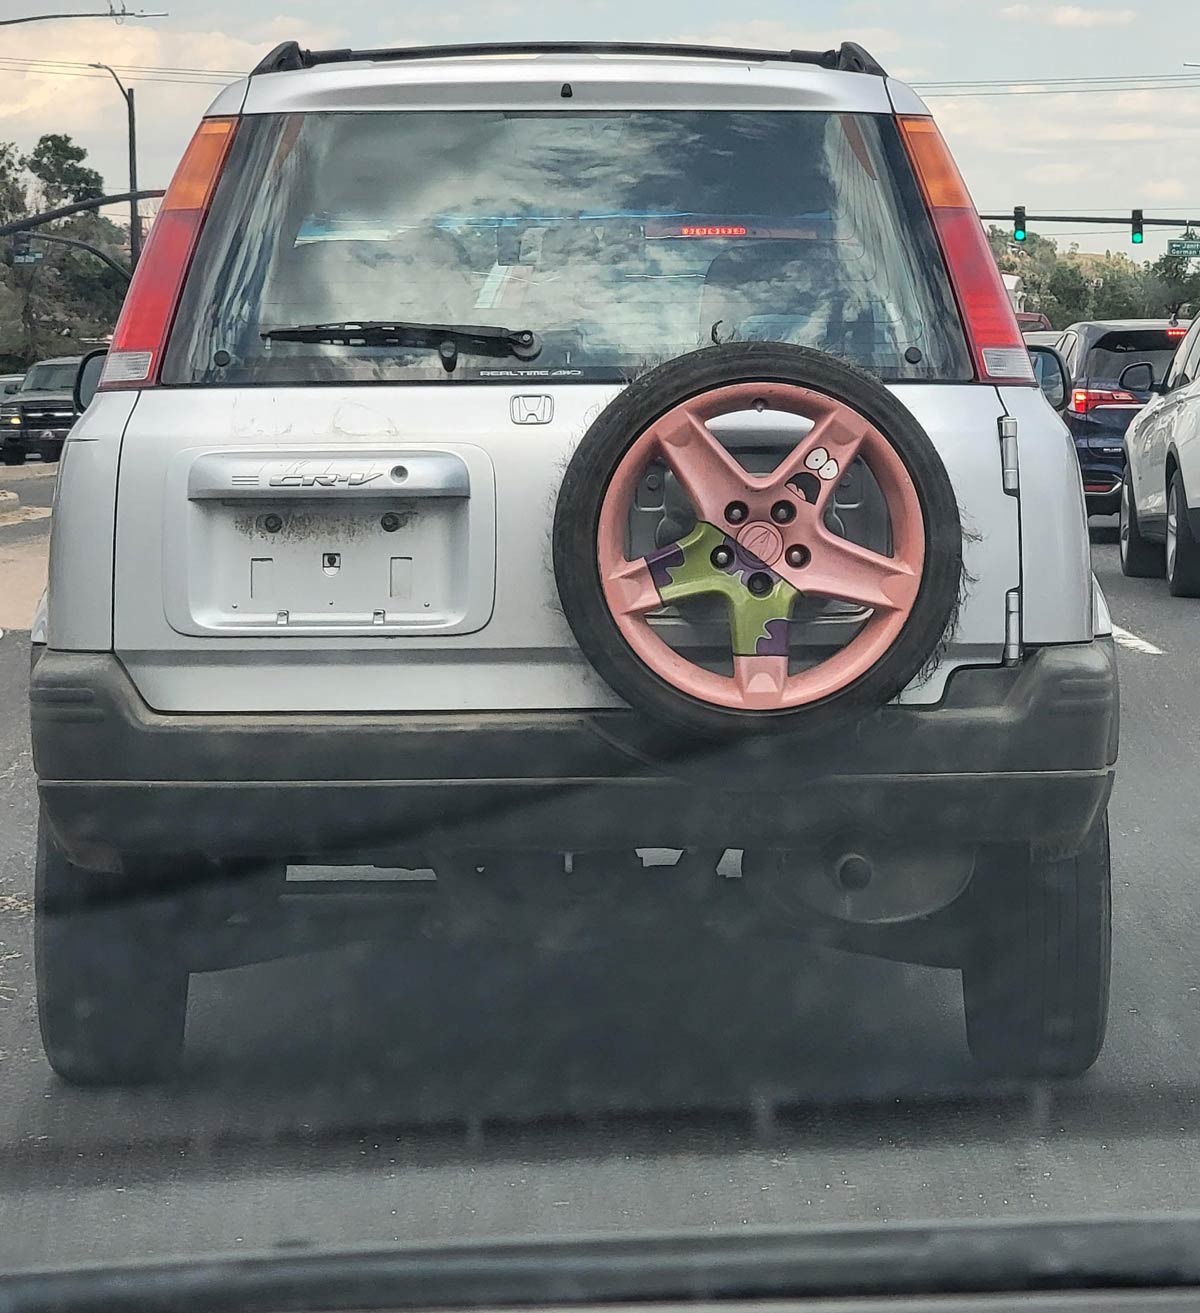 Saw this funny spare on my way to work